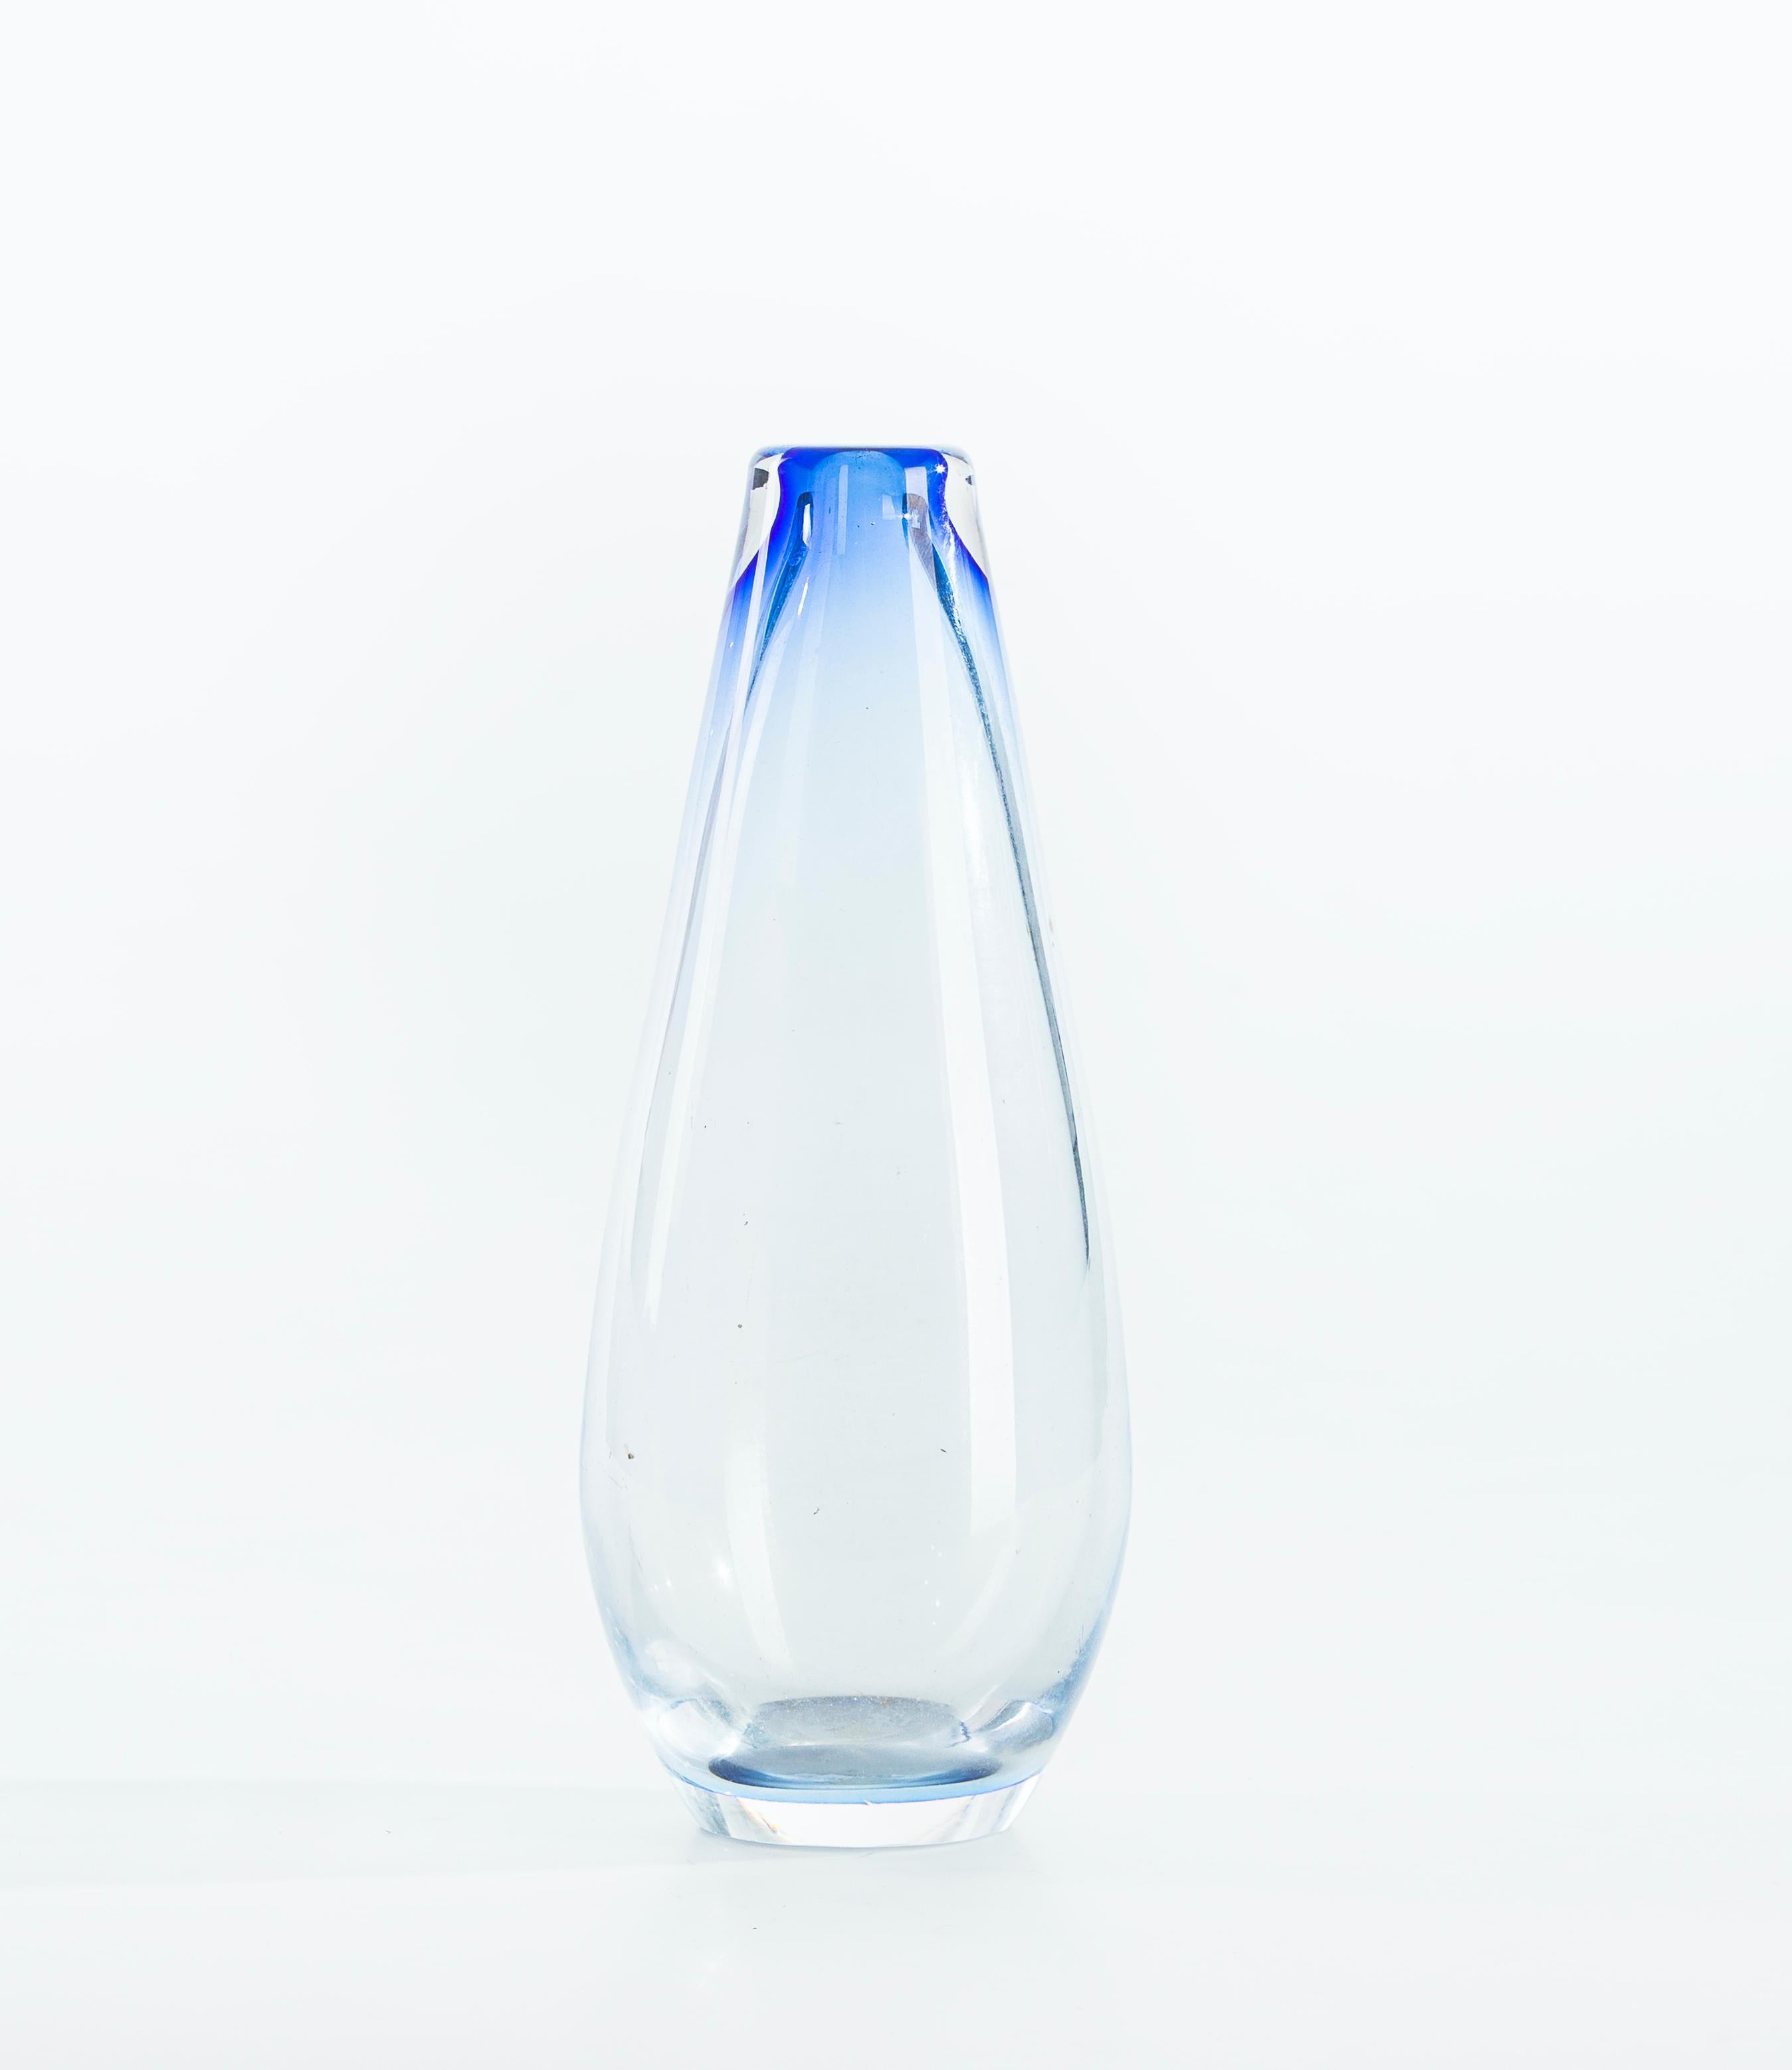 This blue blended glass Vase is a small unifleur vase, in the transparent, coated glass, with shades sloping to blue cobalt.

Made in Italy in the 1960s. In excellent condition, this is a delicious piece for a romantic and sophisticated dinner!